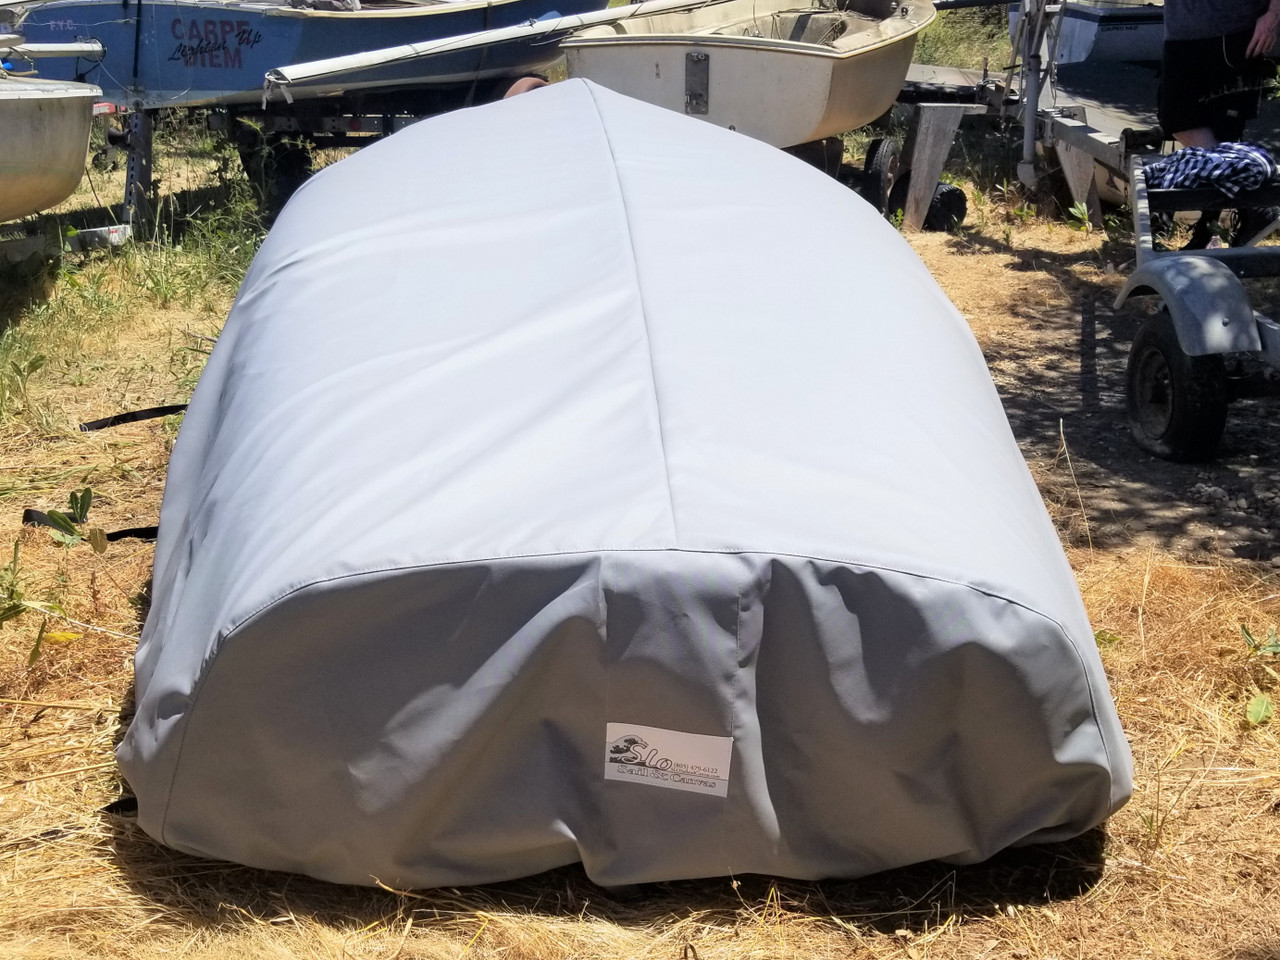 Bottom Hull Cover (with a solid transom) for a Coronado 15 sailing dinghy sailboat made in the USA by SLO Sail and Canvas. 